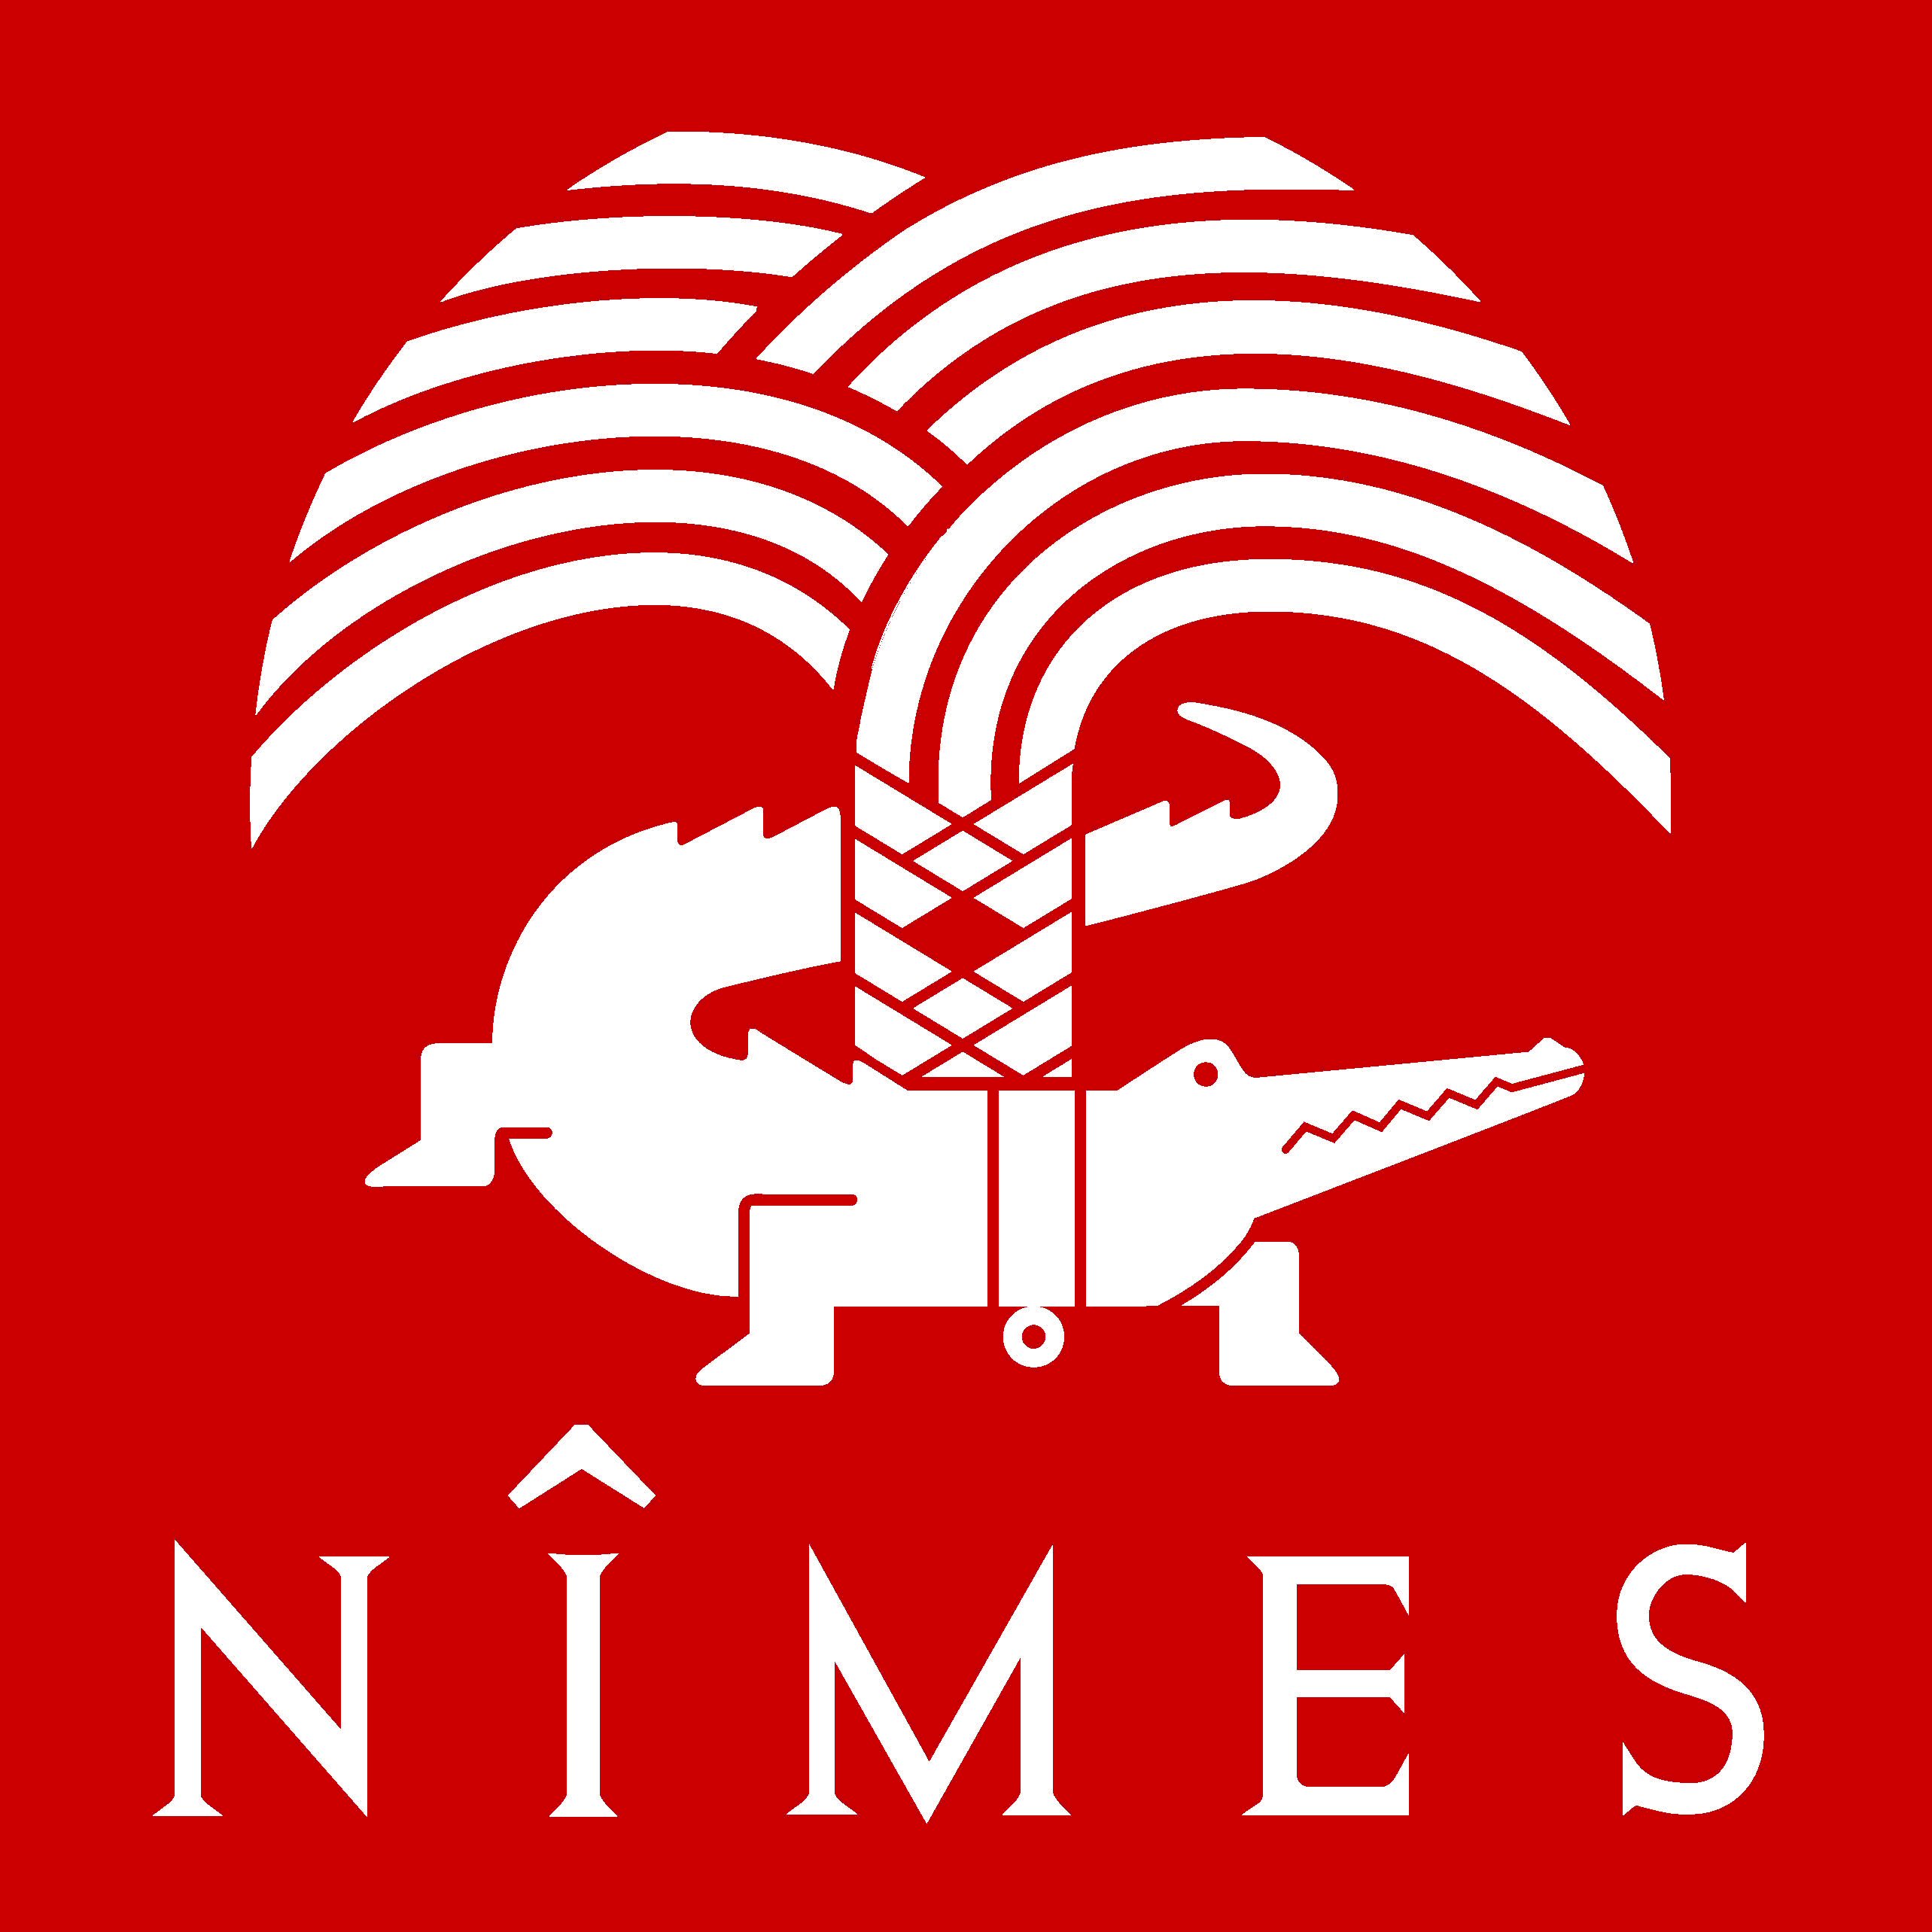 Central Social Activities Fund of Nîmes, France